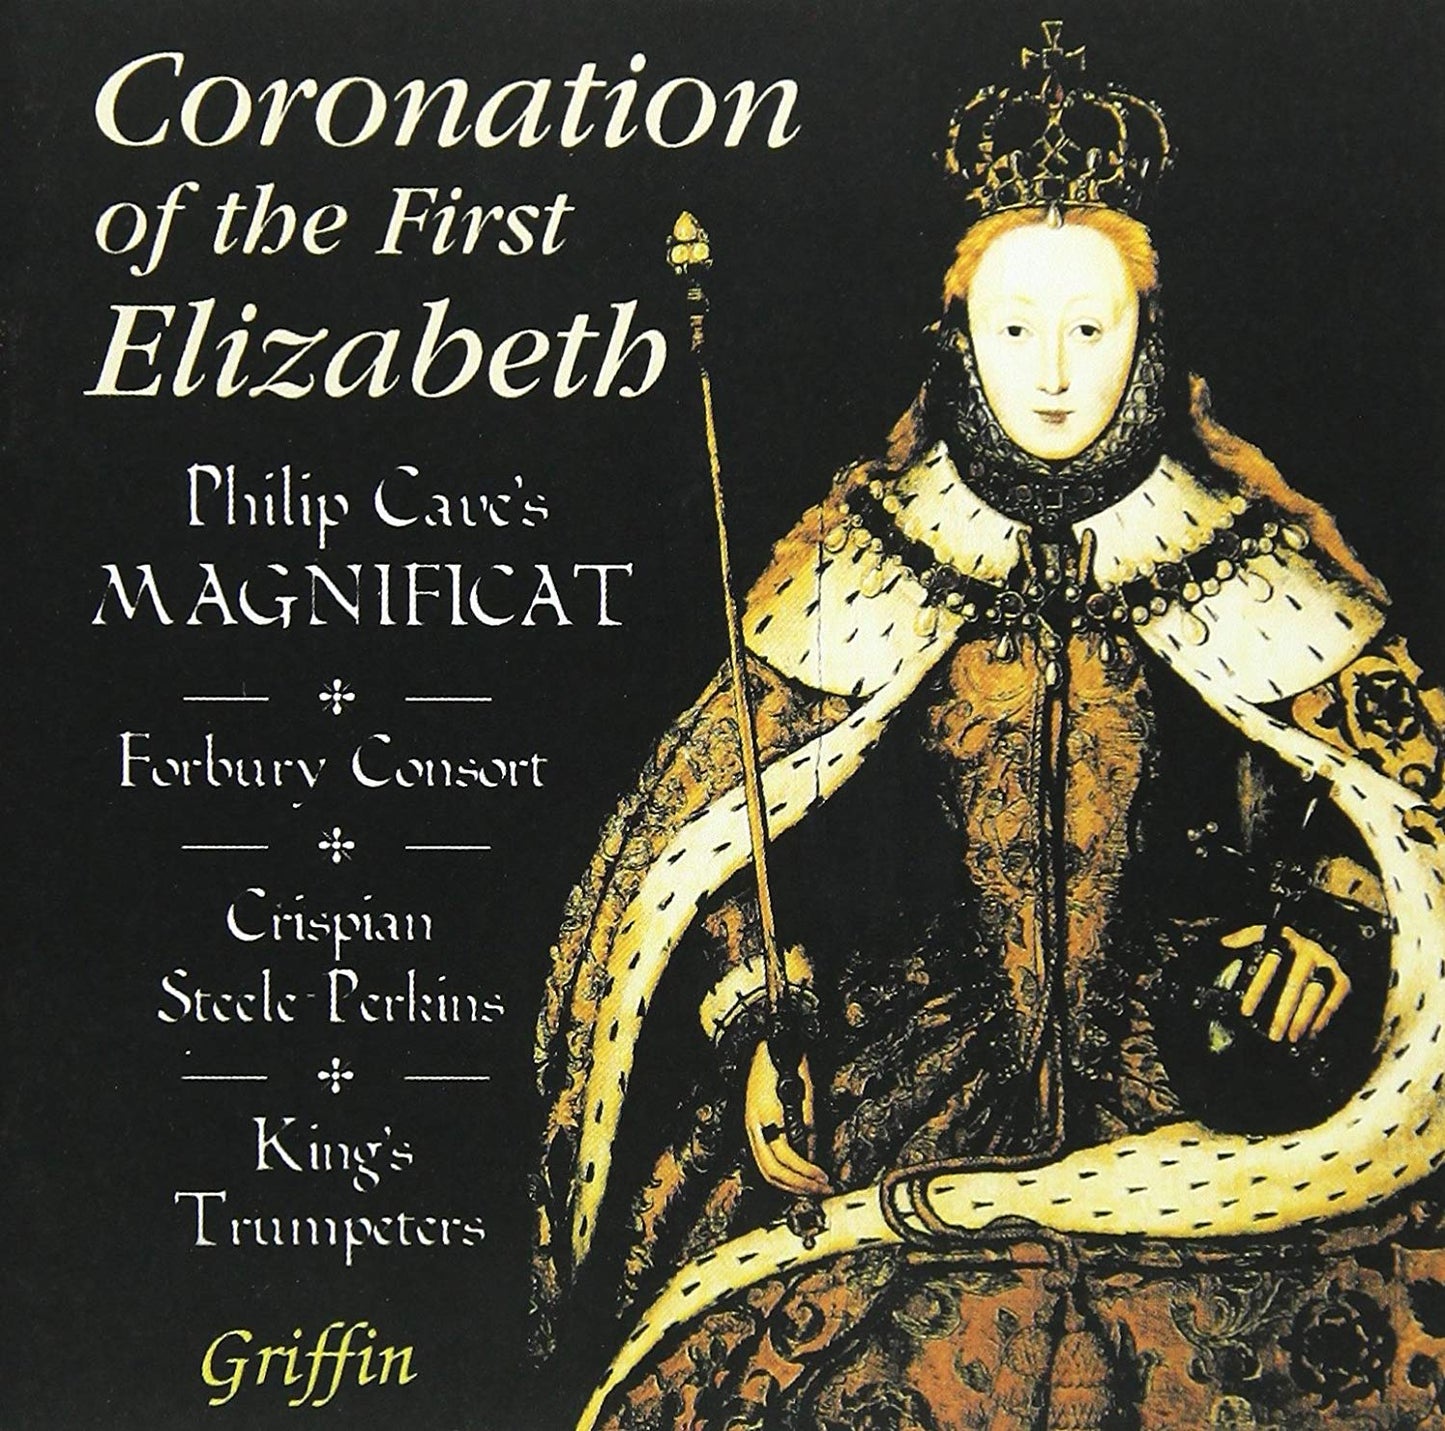 CORONATION OF THE FIRST ELIZABETH (CAVE'S MAGNIFICAT) - FORBURY CONSORT, STEELE-PERKINS, KING'S TRUMPETERS